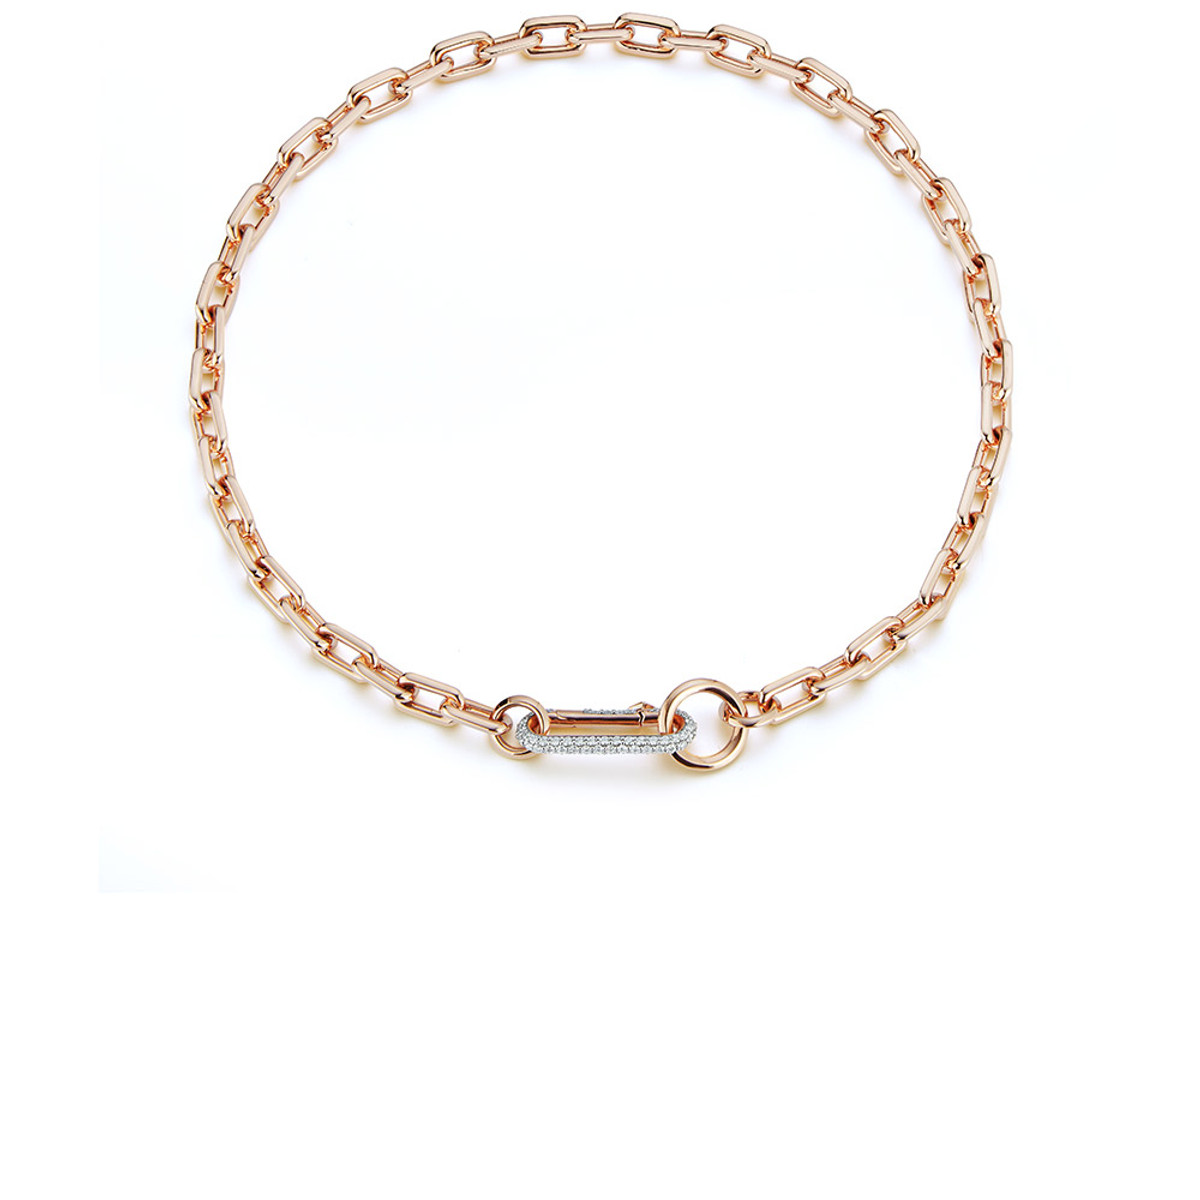 Walters Faith Saxon 18K Rose Gold Chain Link Necklace-62272 Product Image